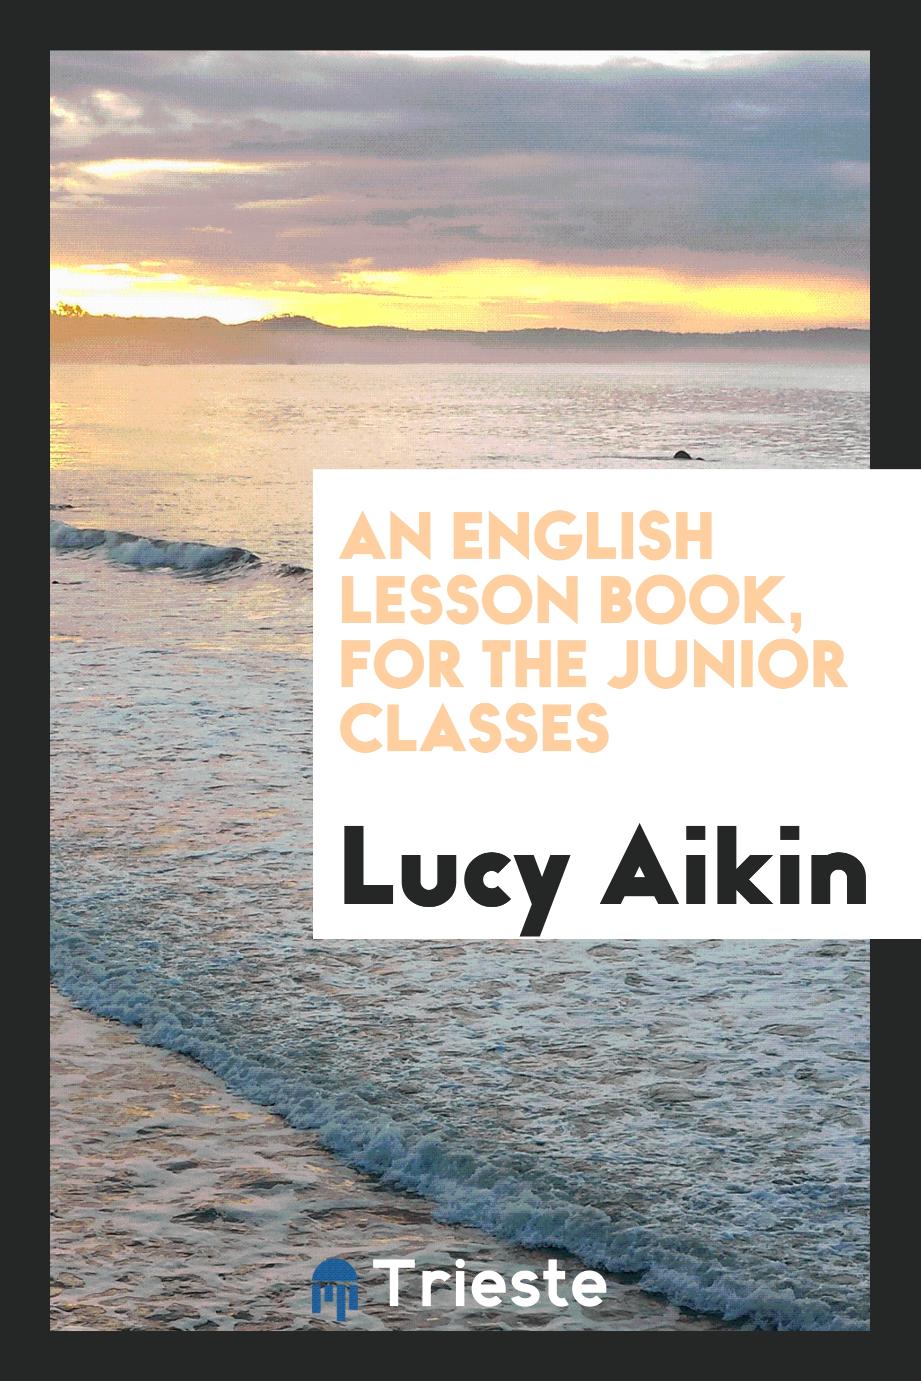 An English Lesson Book, for the Junior Classes